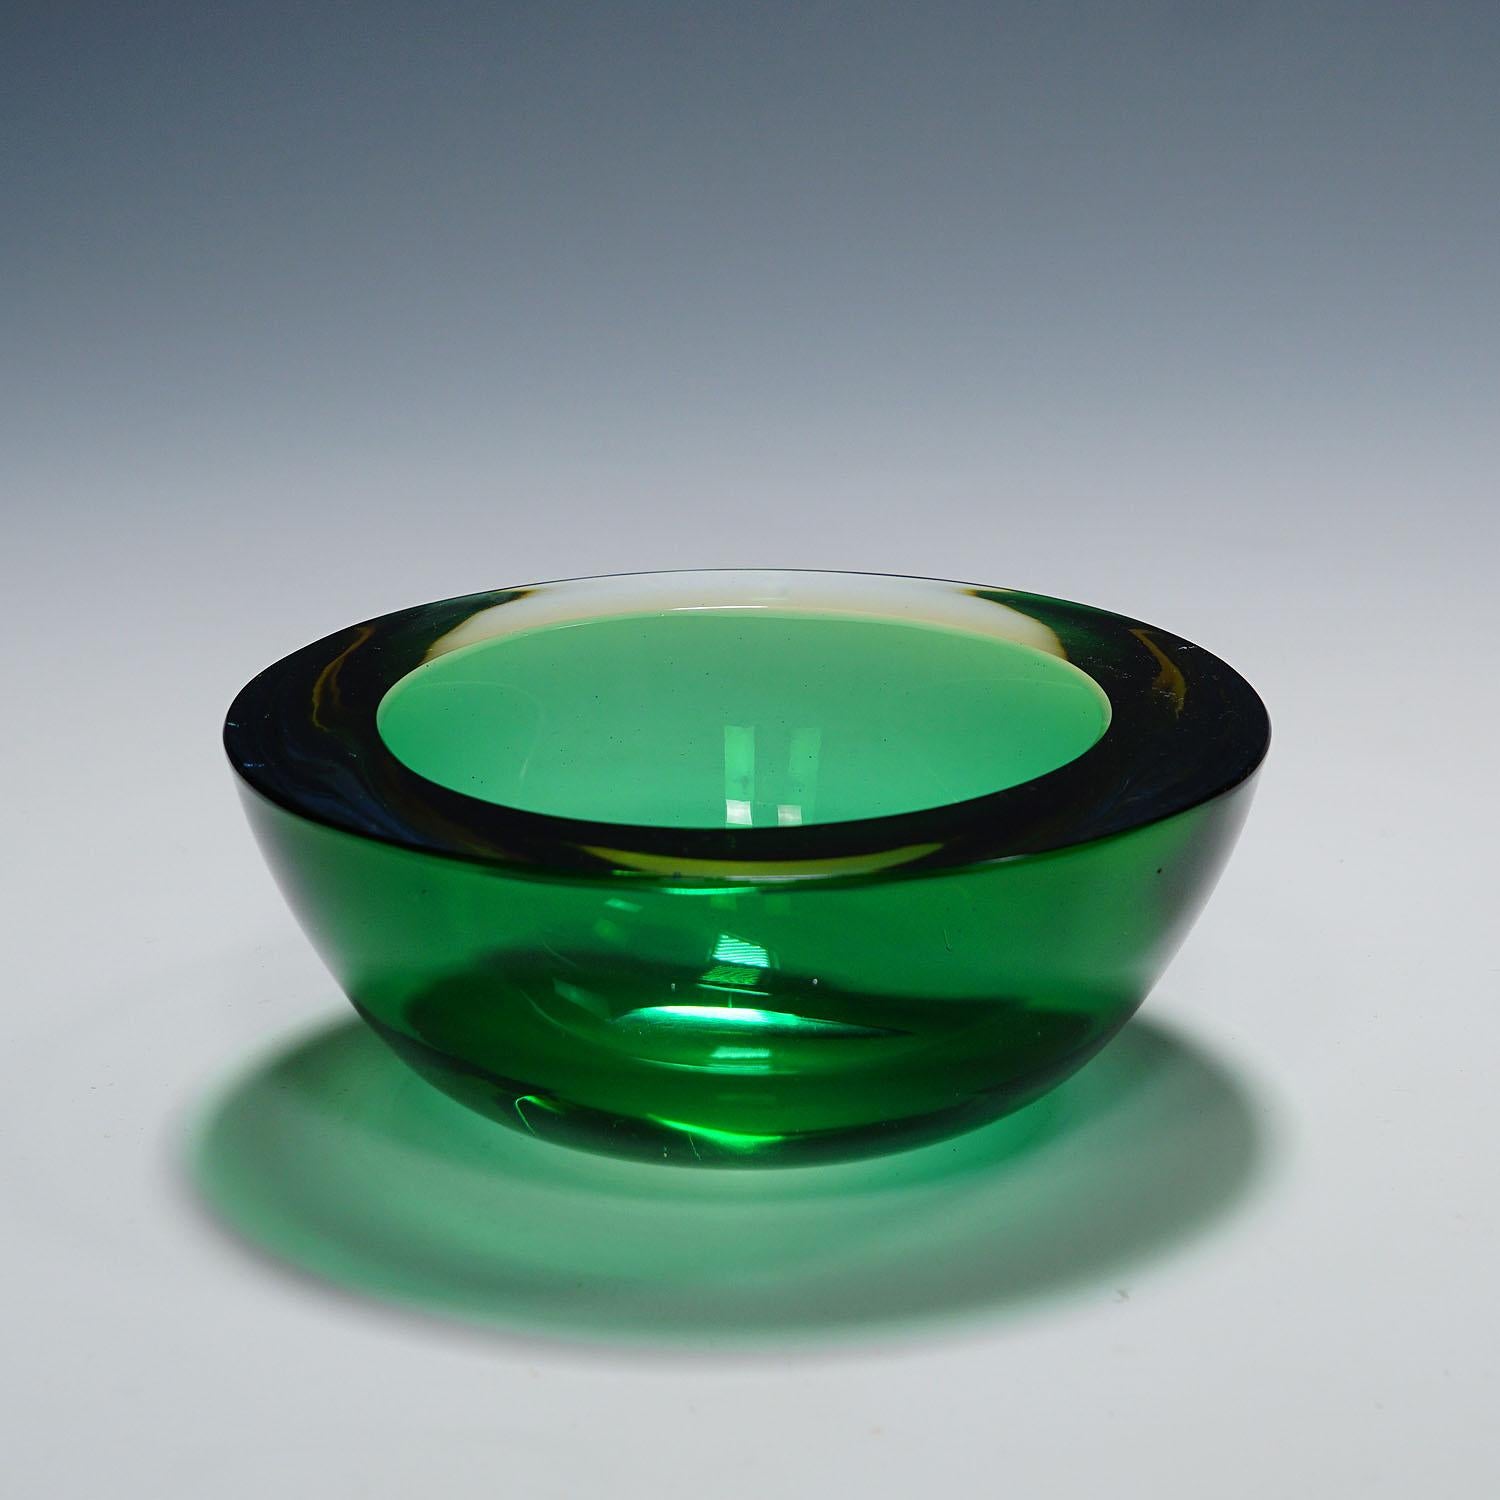 Archimede Seguso Geode Bowl in Green and Yellow, Murano Italy ca. 1960s

A vintage Venetian art glass bowl in the shape of an geode designed by Archimede Seguso for Vetreria Artistica Archimede Seguso ca. 1960s. Thick sommerso glass with green,